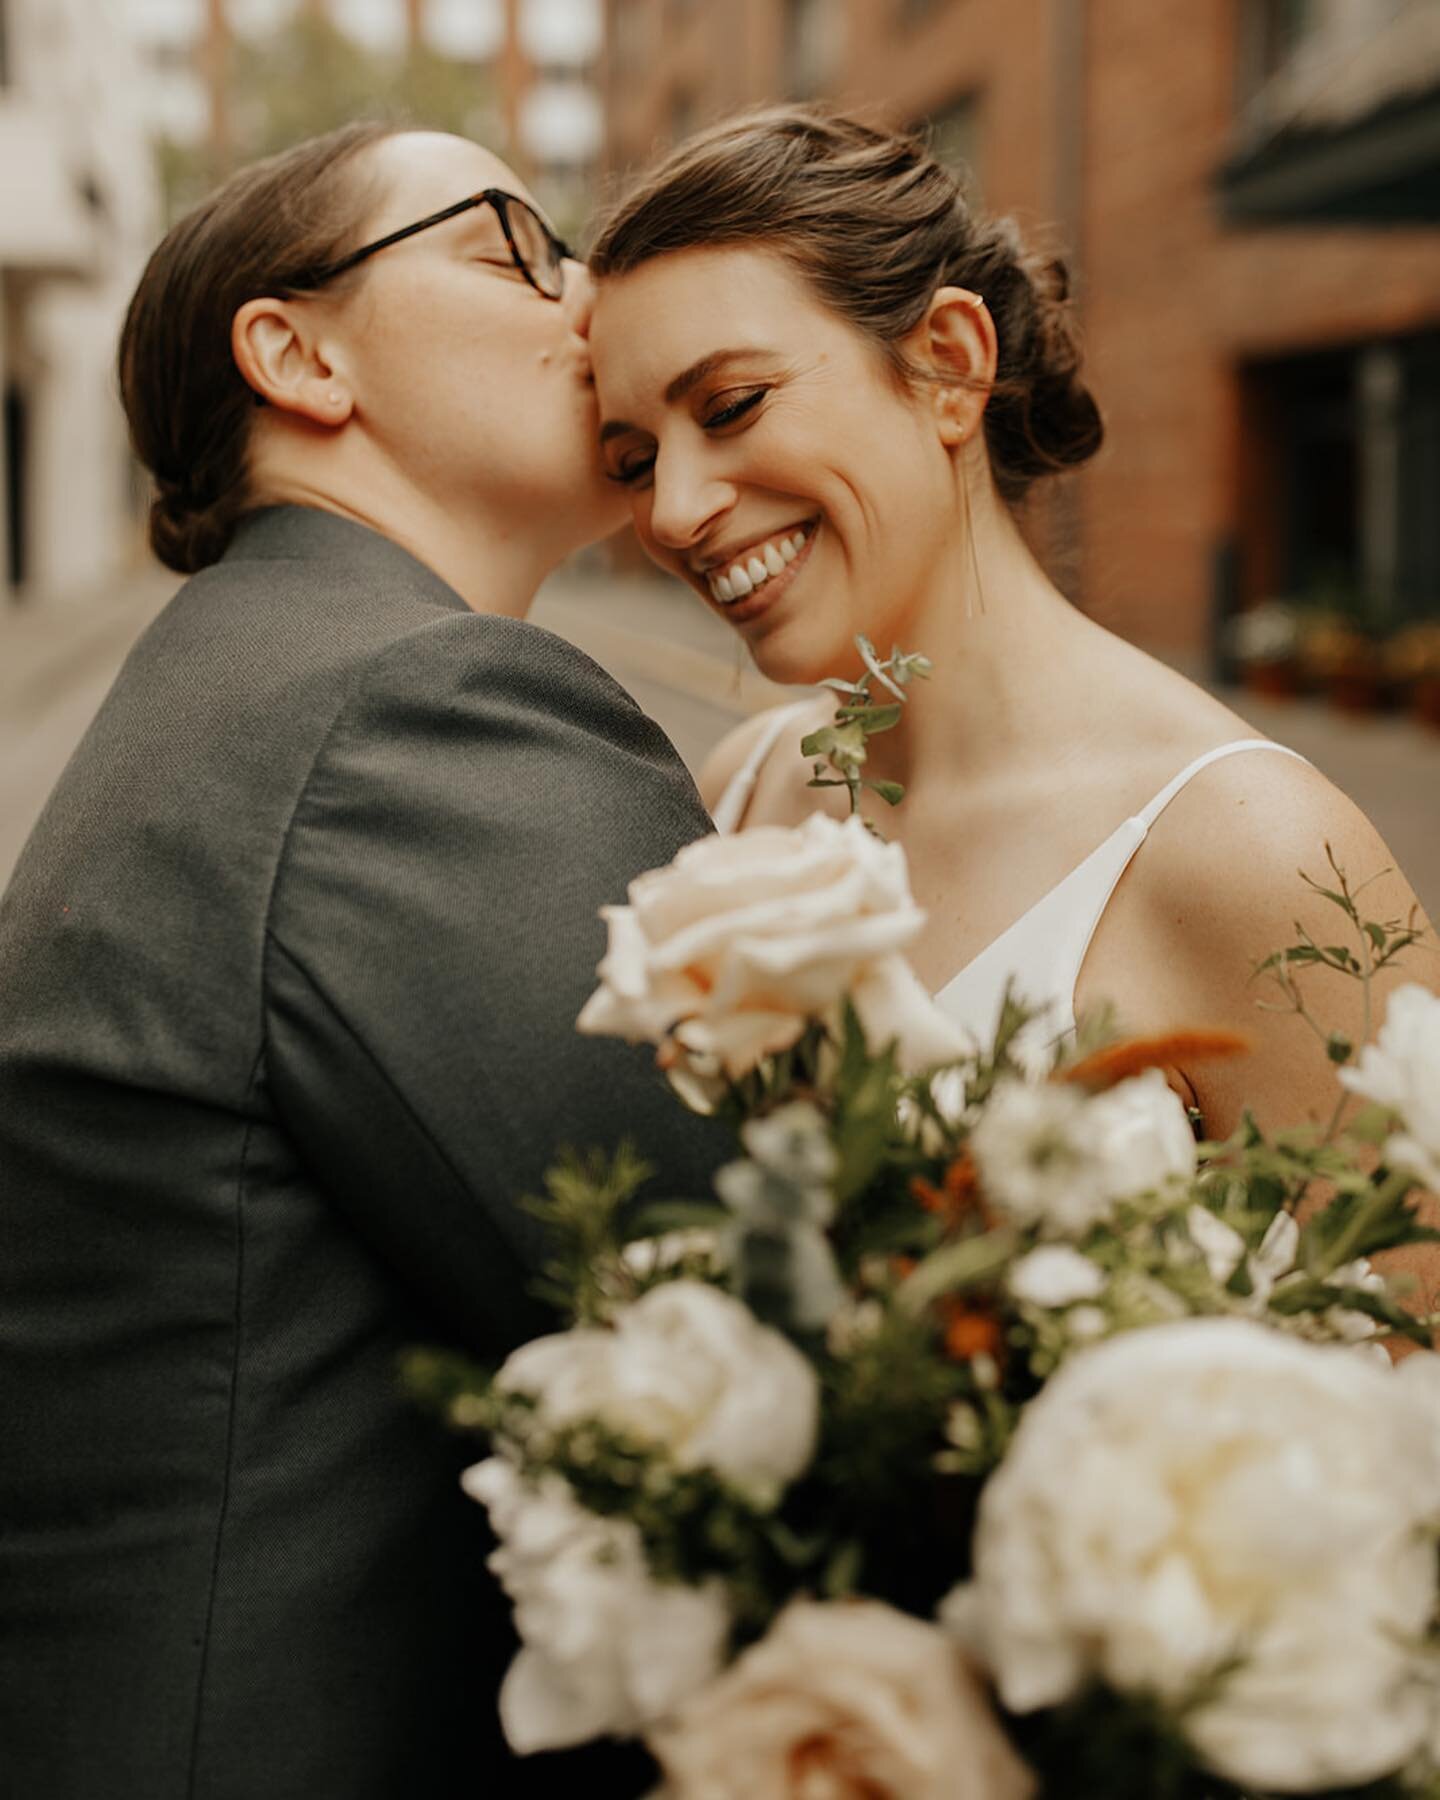 Still obsessing over Lizzy and Megan. Swipe to see the sweetest first look reaction 😍

#seattlemakeupartist #bridalmakeup #snohomishmakeupartist